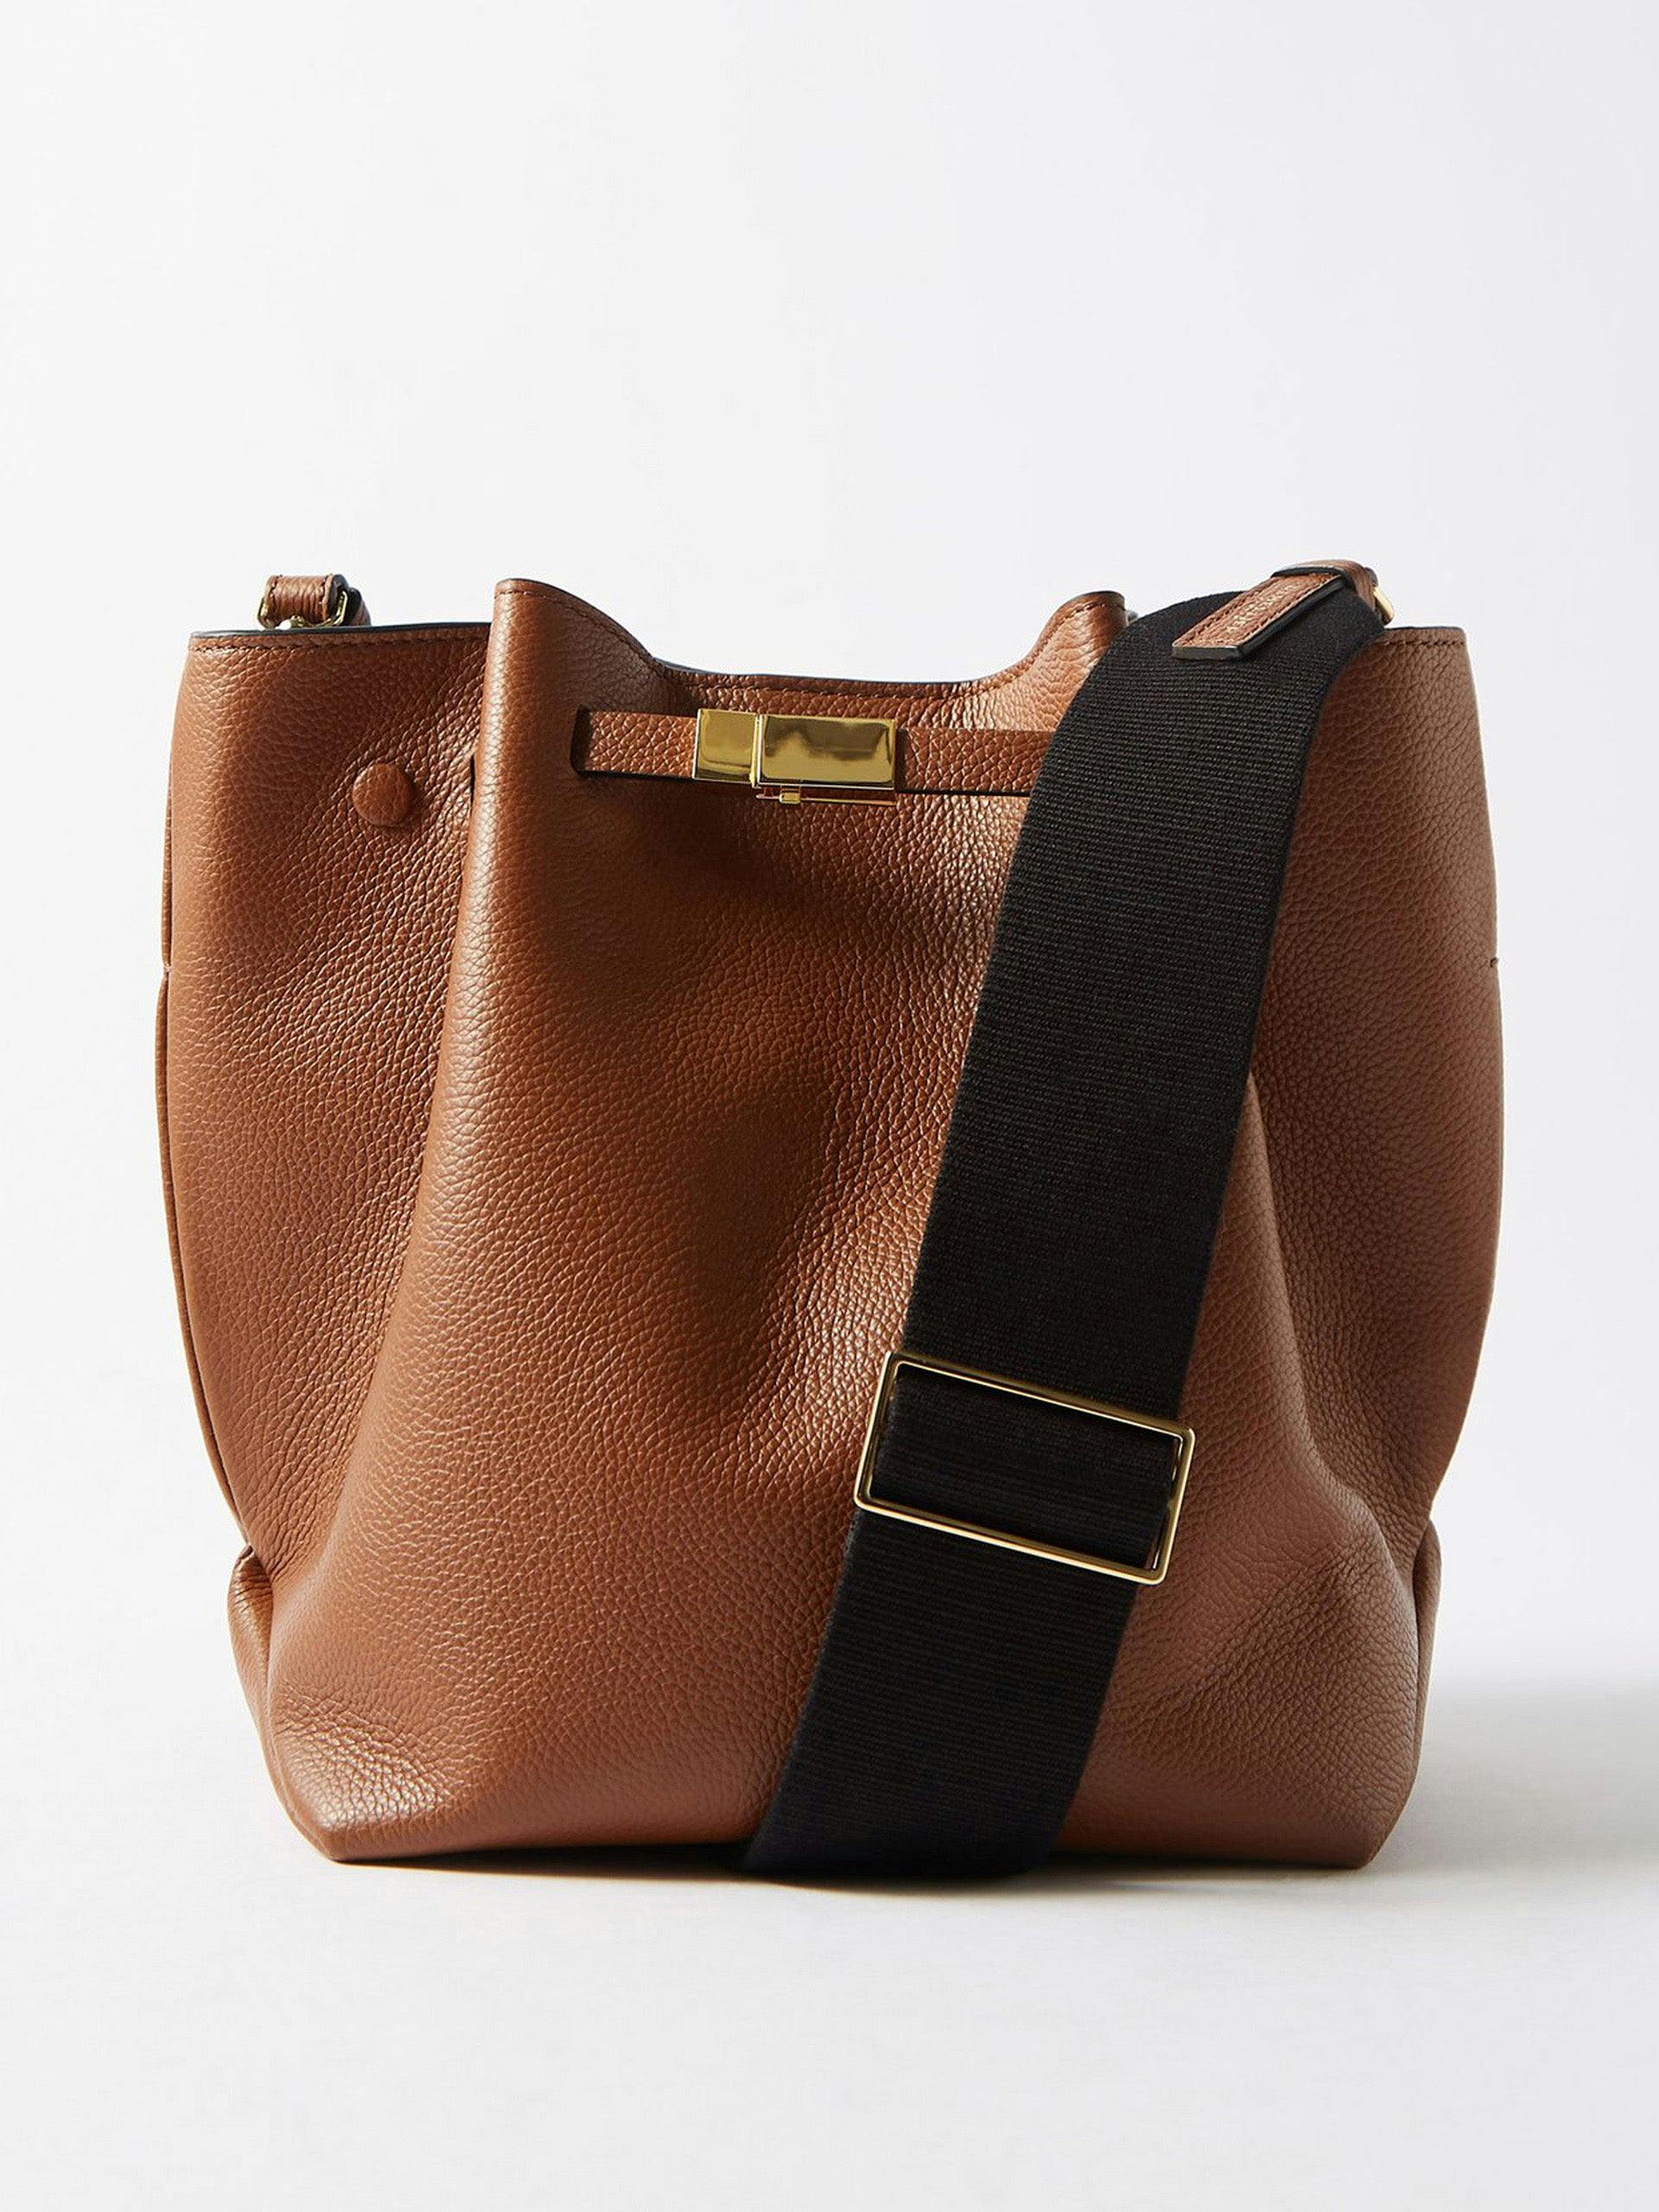 Grained leather bucket bag with detachable web strap